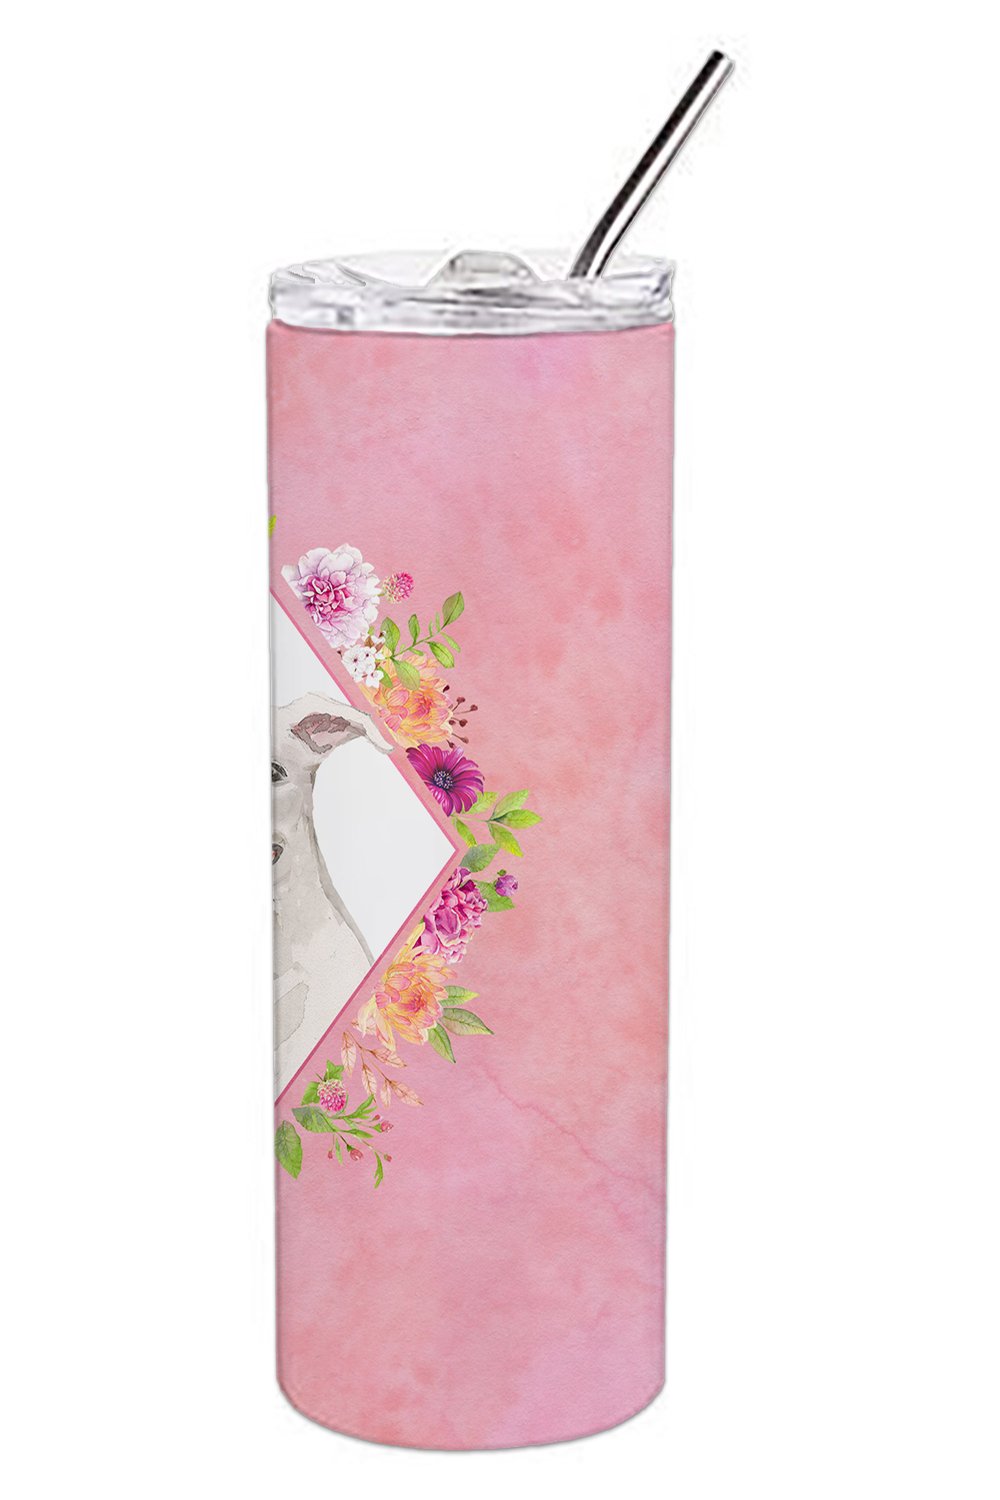 White Pit Bull Terrier Pink Flowers Double Walled Stainless Steel 20 oz Skinny Tumbler CK4268TBL20 by Caroline's Treasures